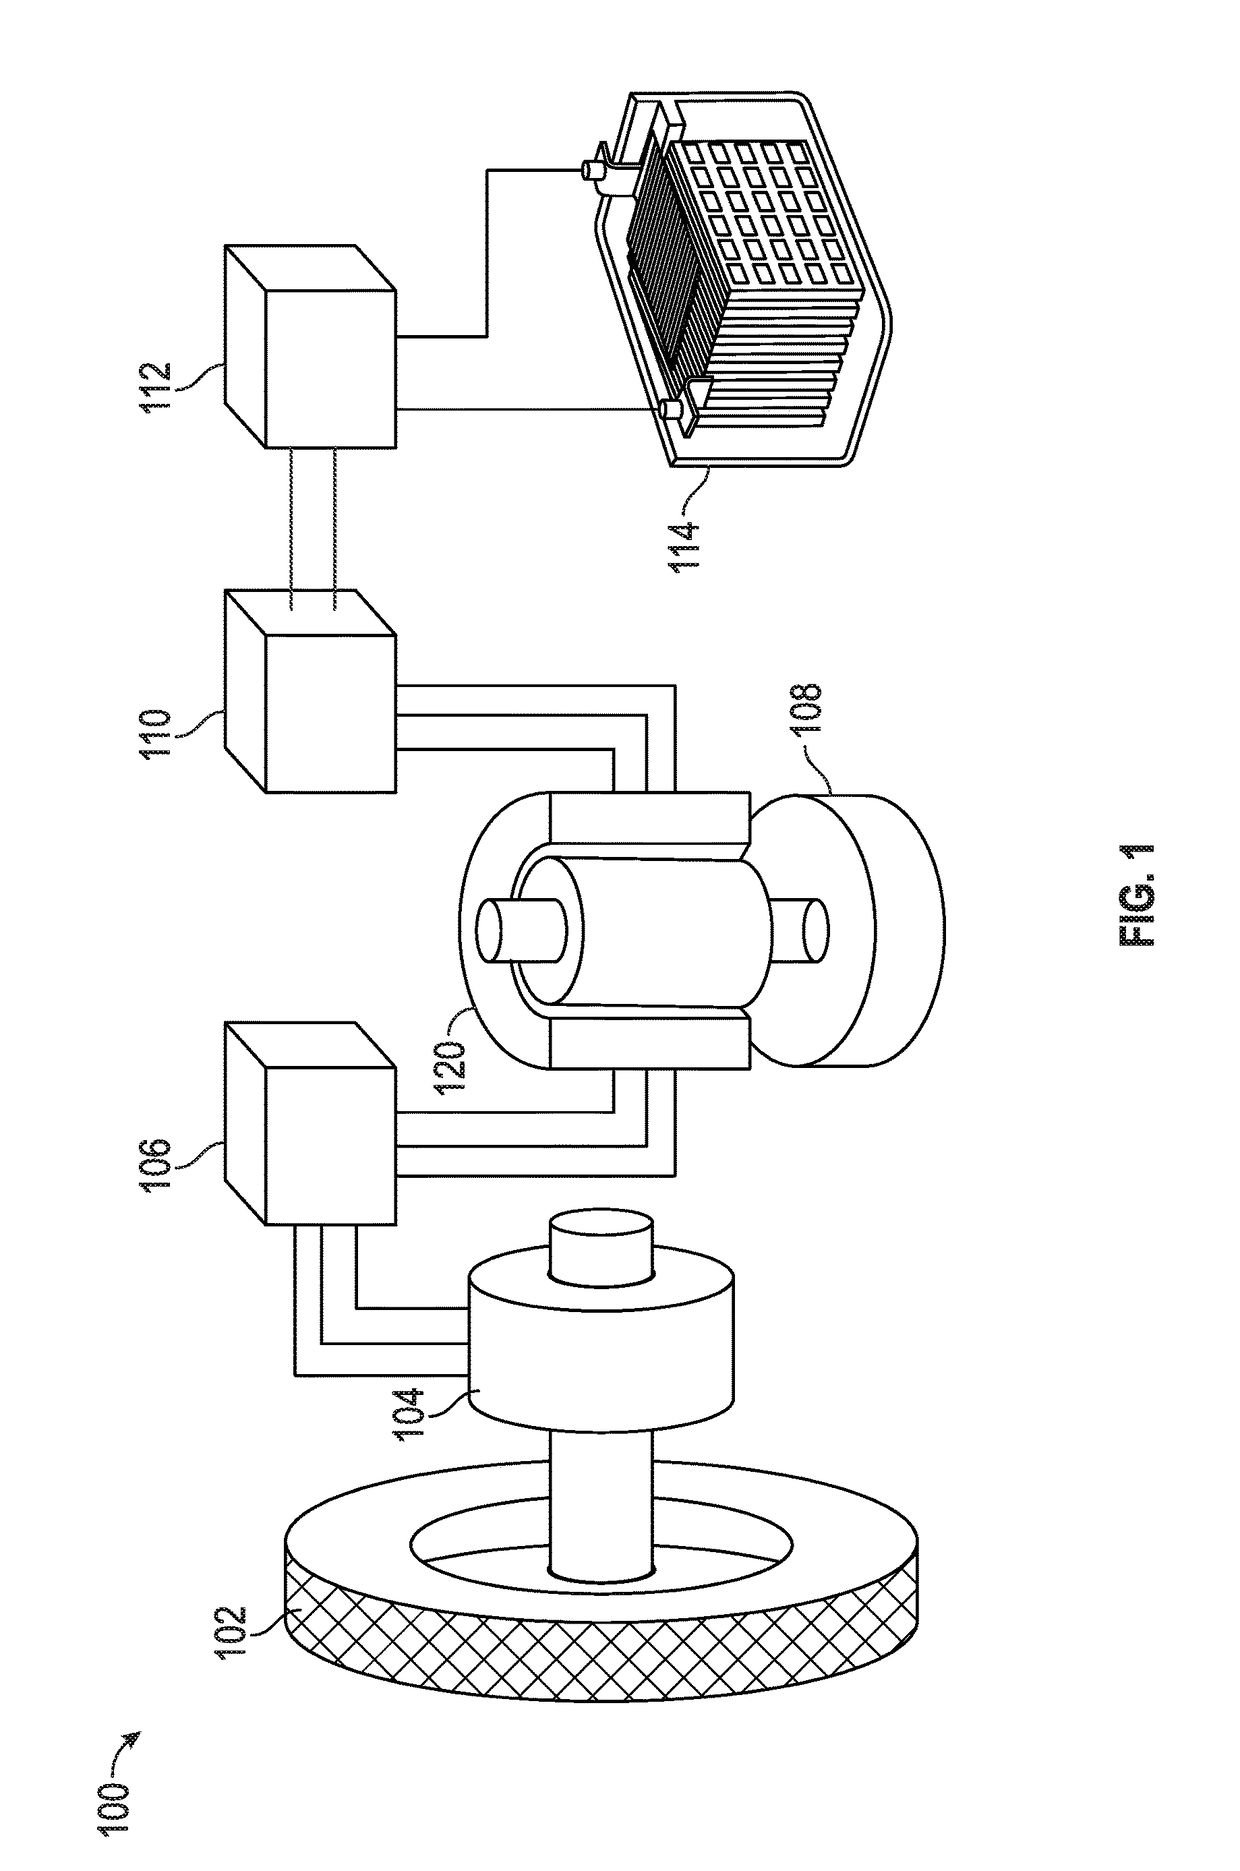 Motor-generator with radial-flux double-sided stator